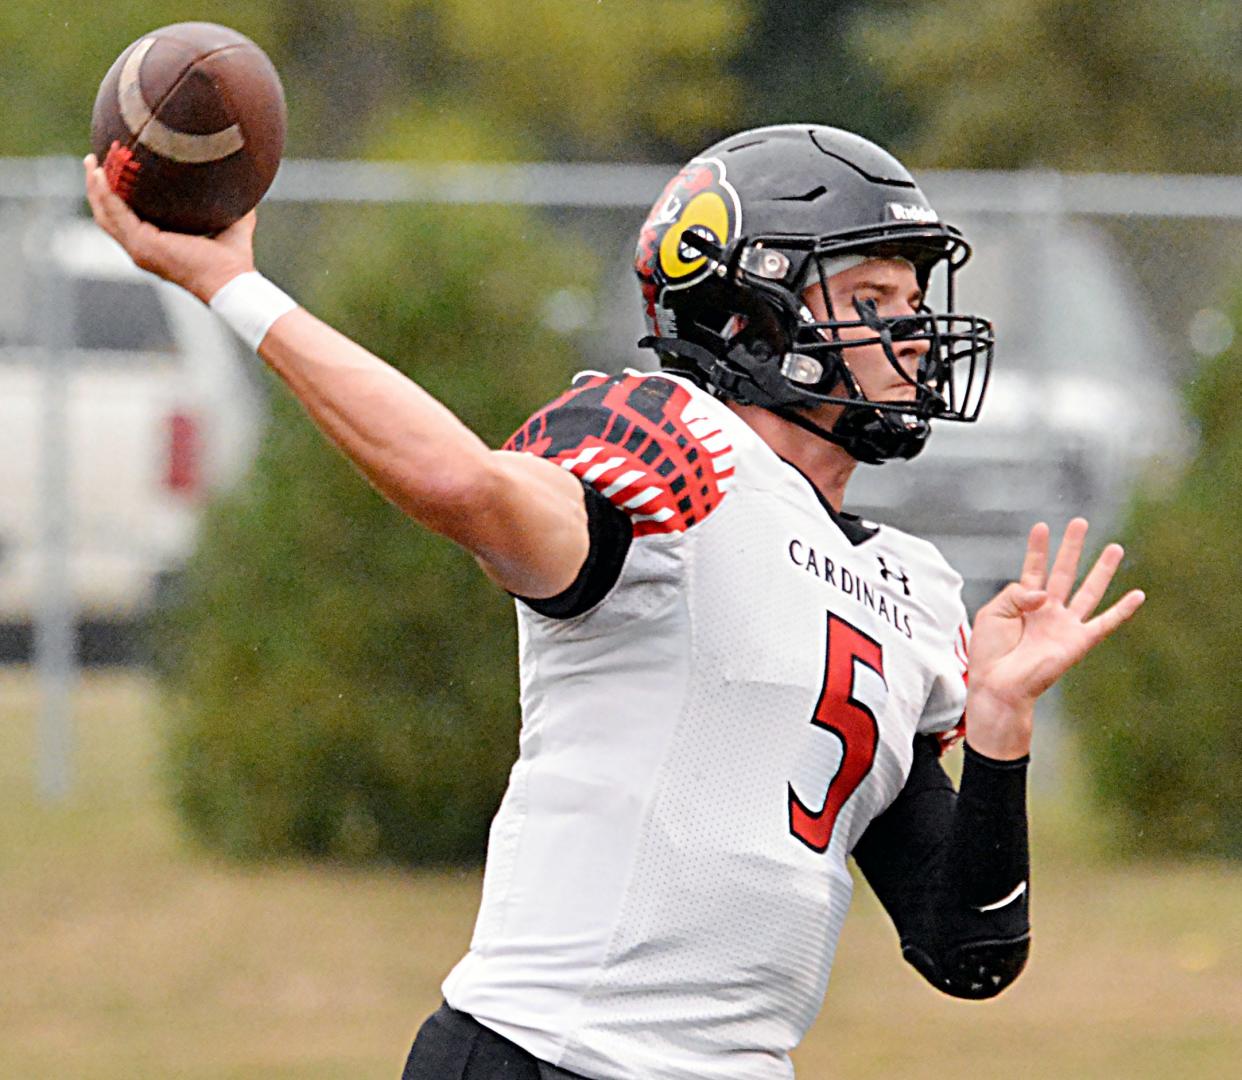 Quarterback Trey Maaland will lead the Deuel Cardinals into a Class 11B quarterfinal playoff game tonight (Thursday) at two-time defending state champion and top-rated Winner at 6 p.m.